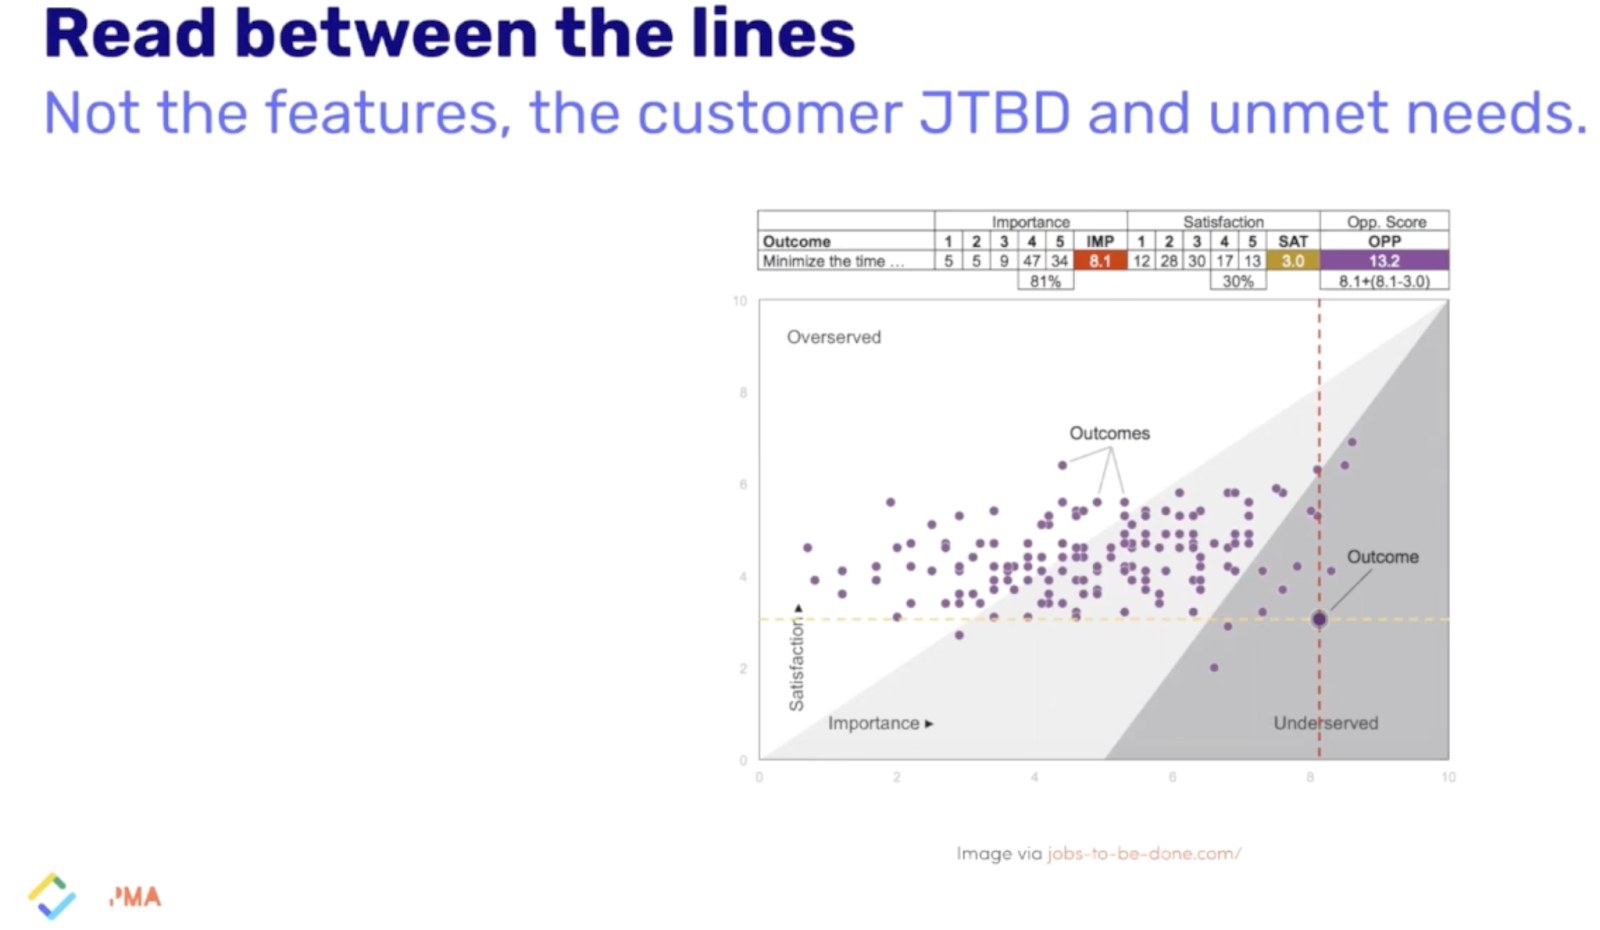 Image titled: 'read between the lines, not the features, the customer JTBD and unmet needs. Shows a dot graph representing this.